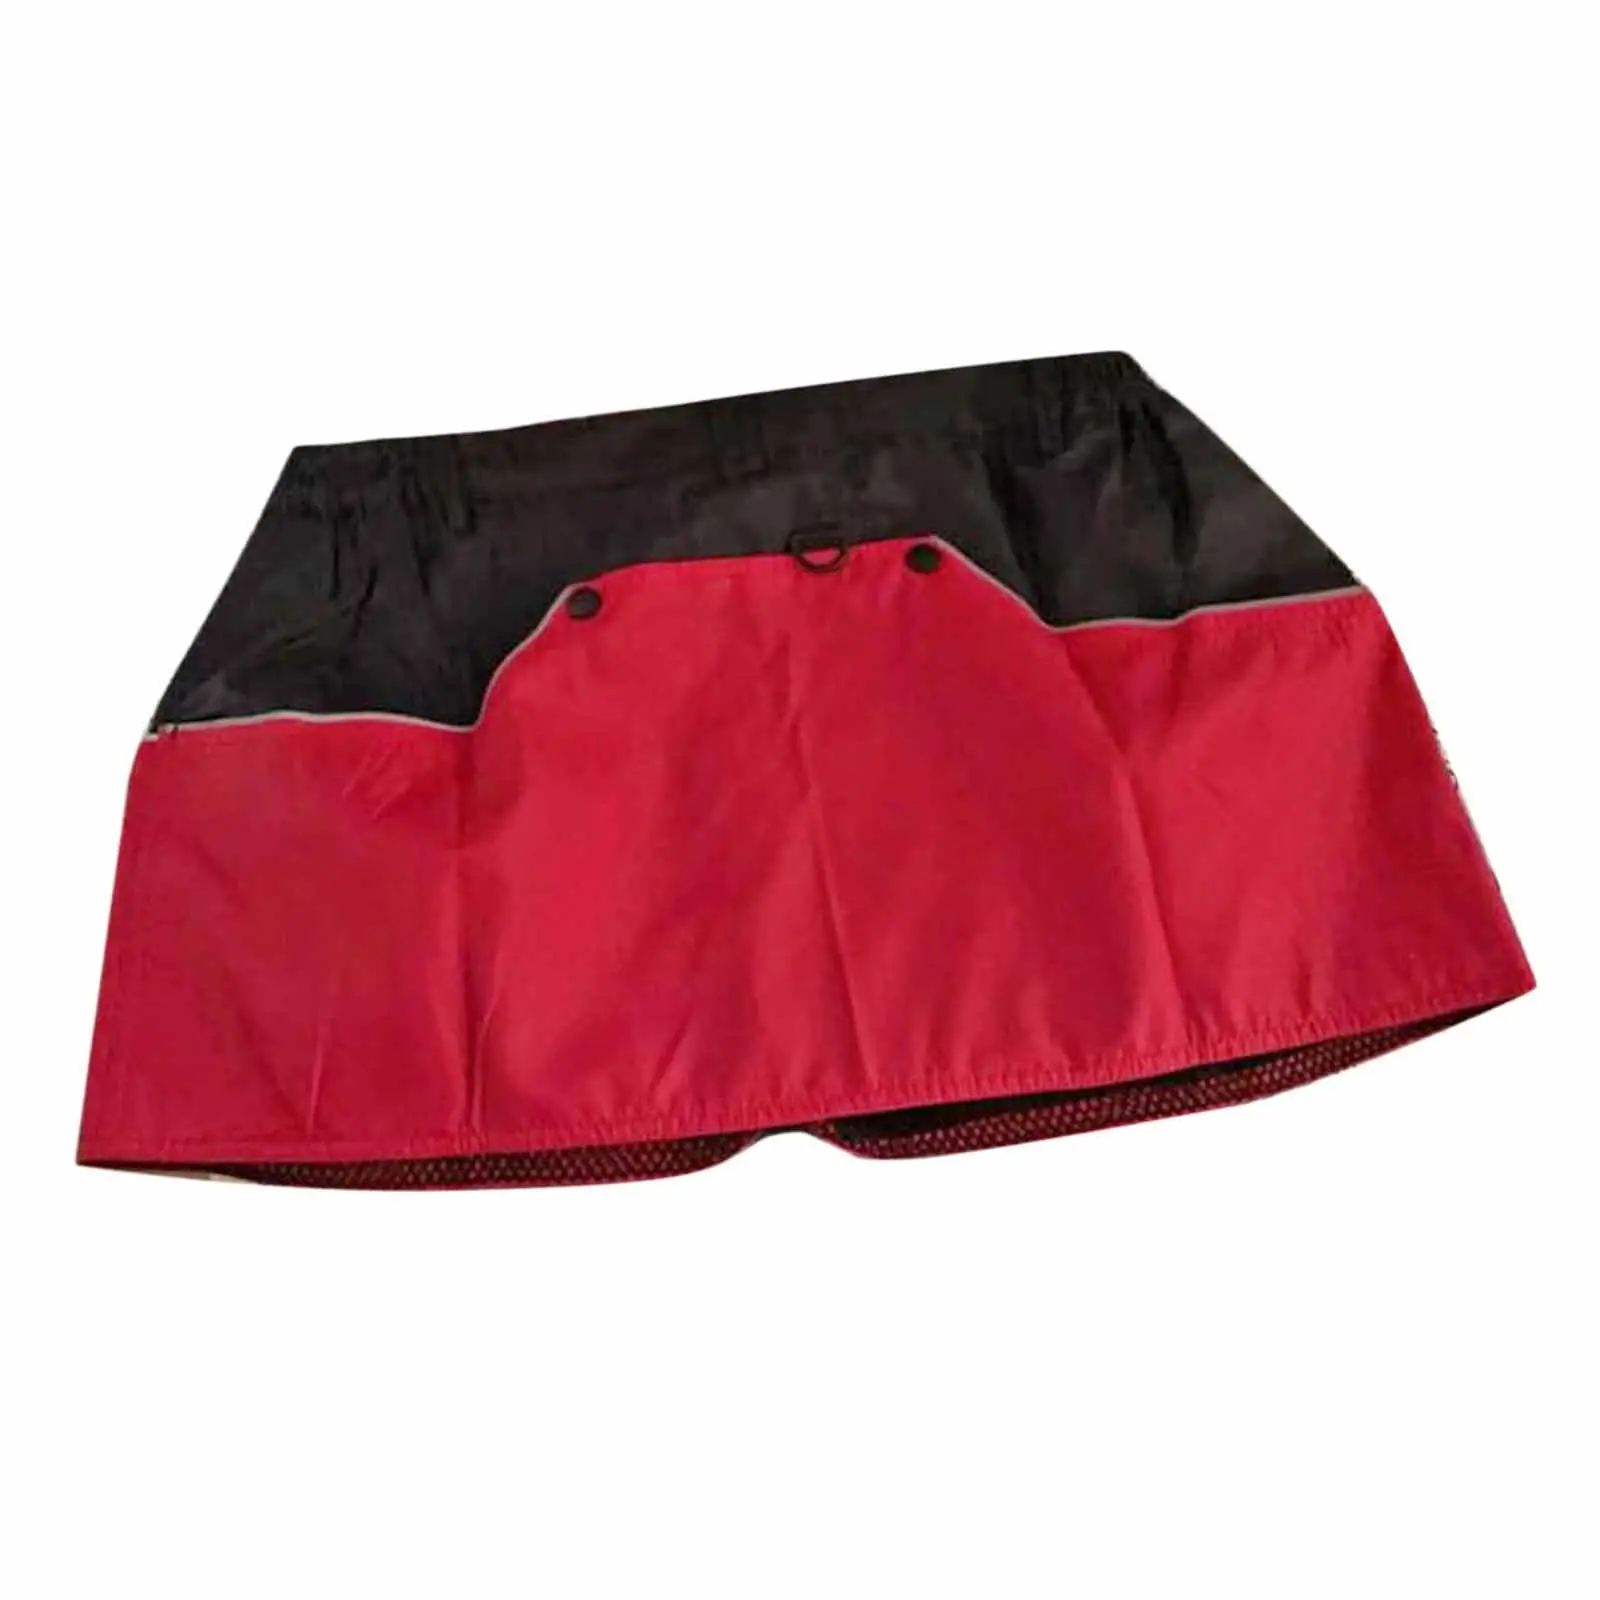 Dog Handler Training Pants with Multi Pockets Dog Trainer Apron for Small Medium Large Dogs